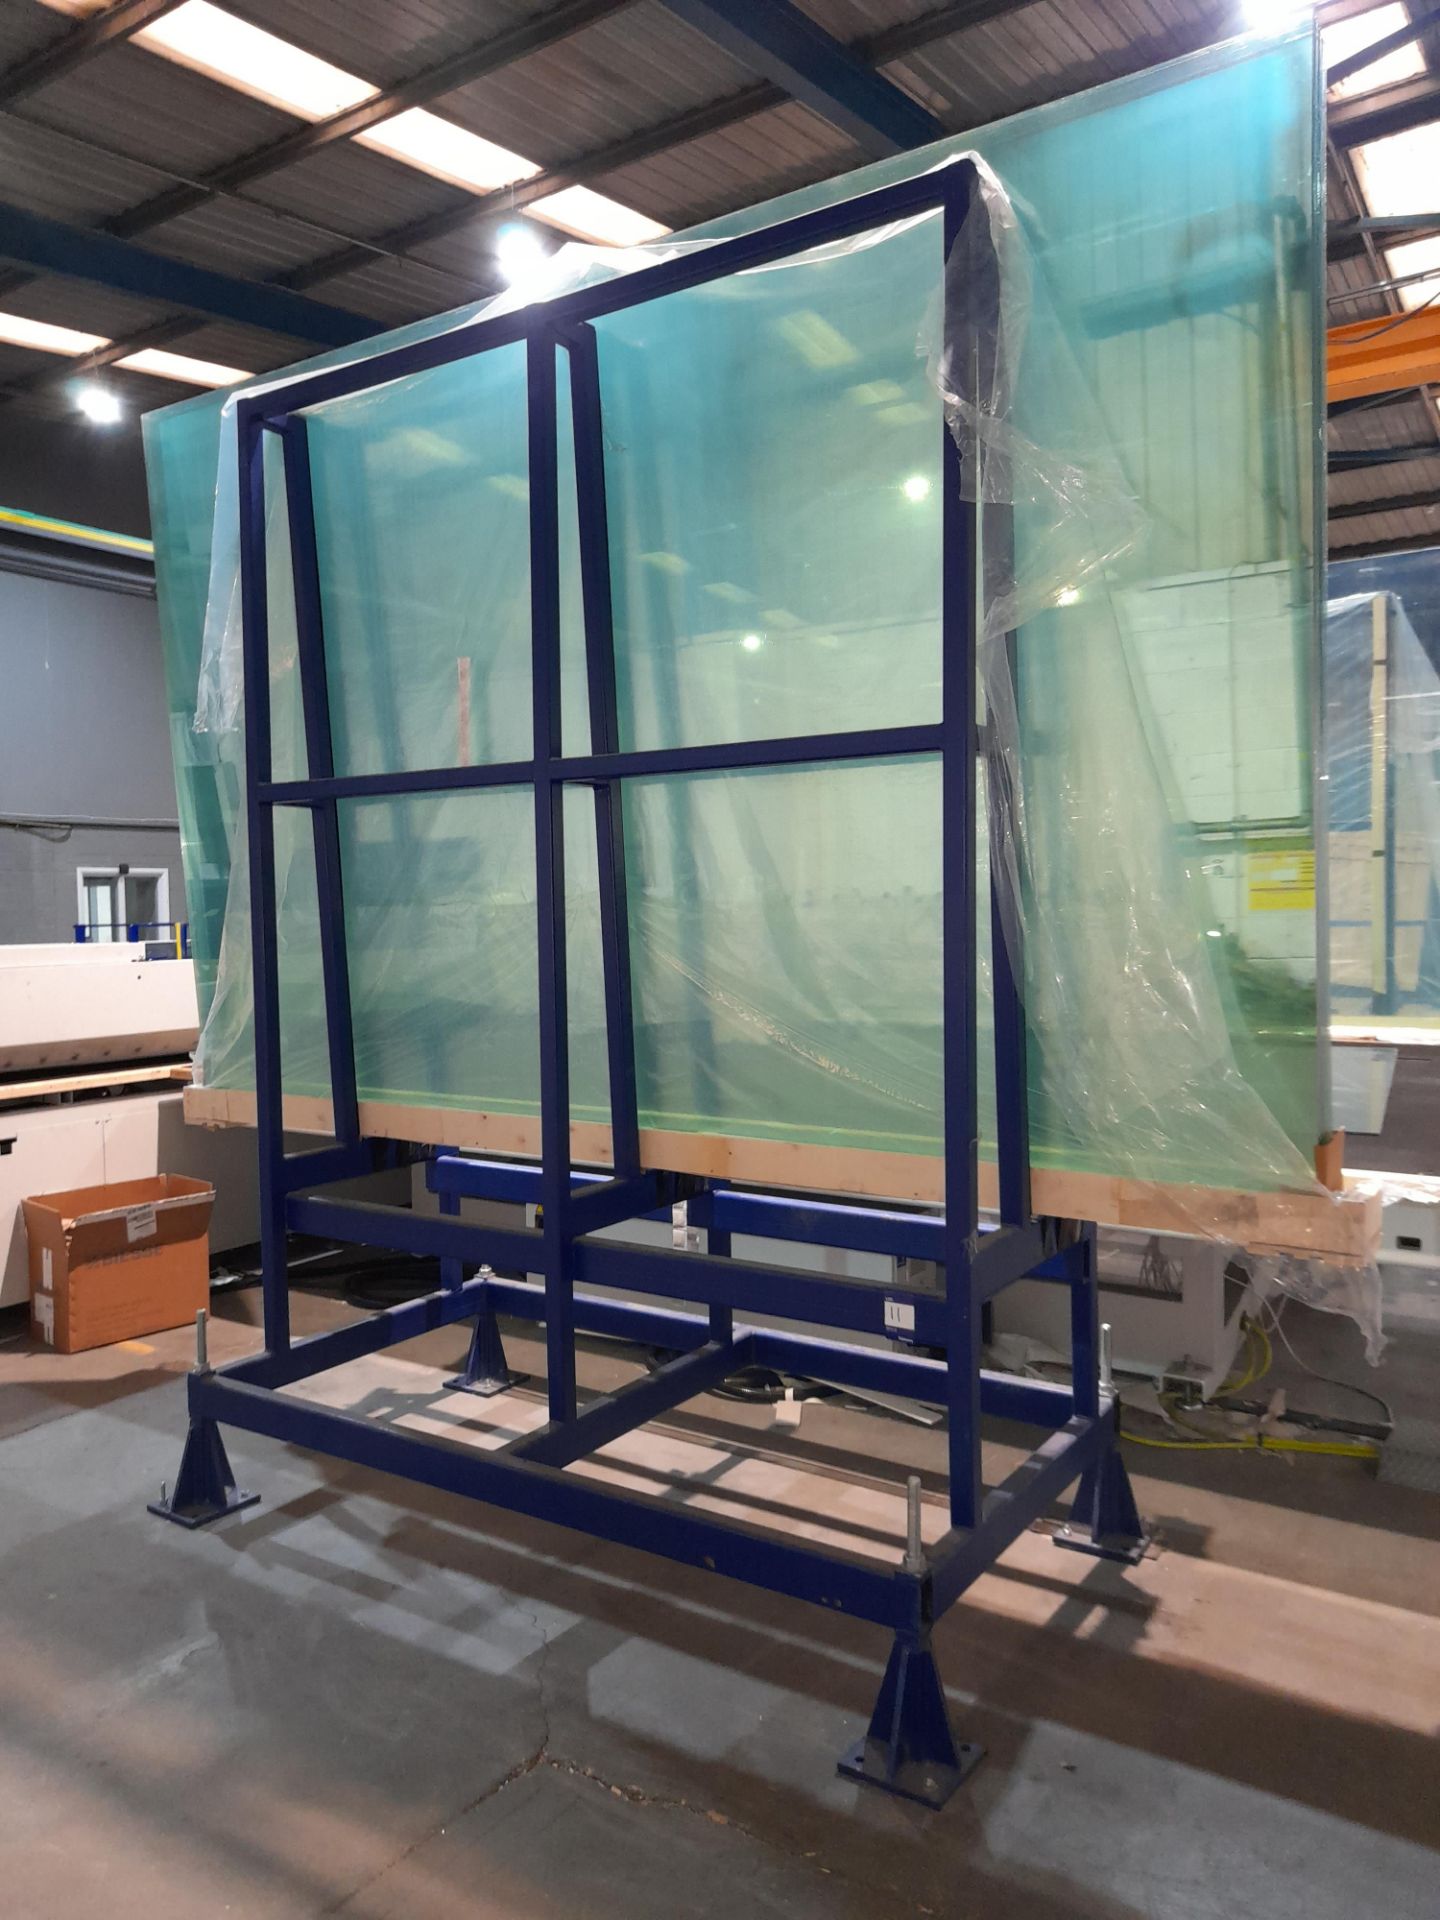 2 x Sheet Glass stock stillage (Contents Included) - Image 4 of 5